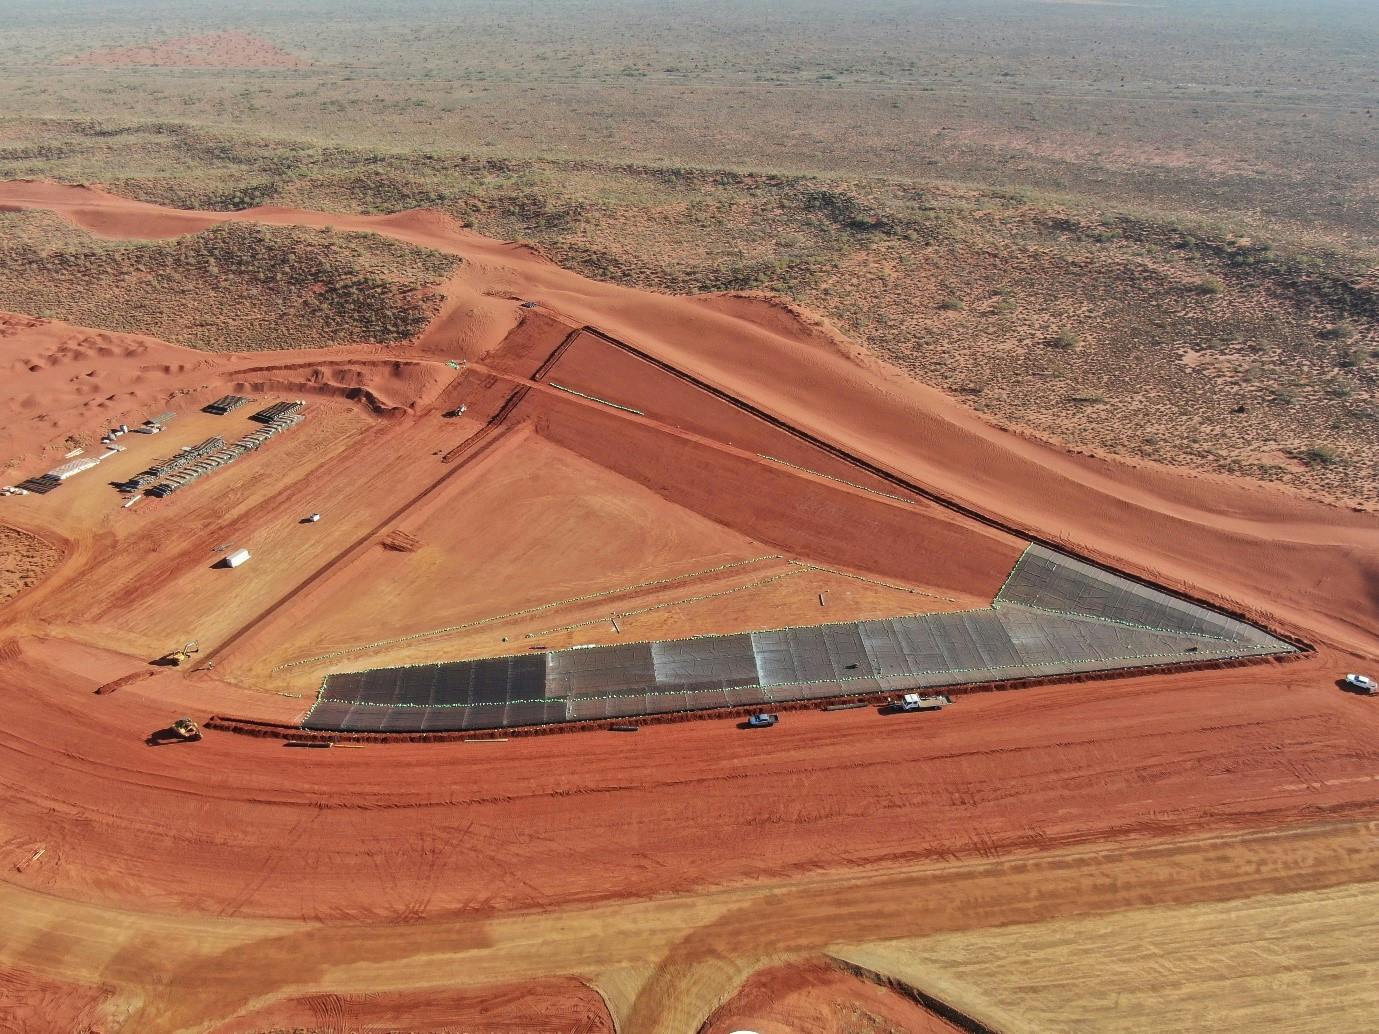 A facility that caters for the need of both the Onslow community and the expanding resources sector across Pilbara.